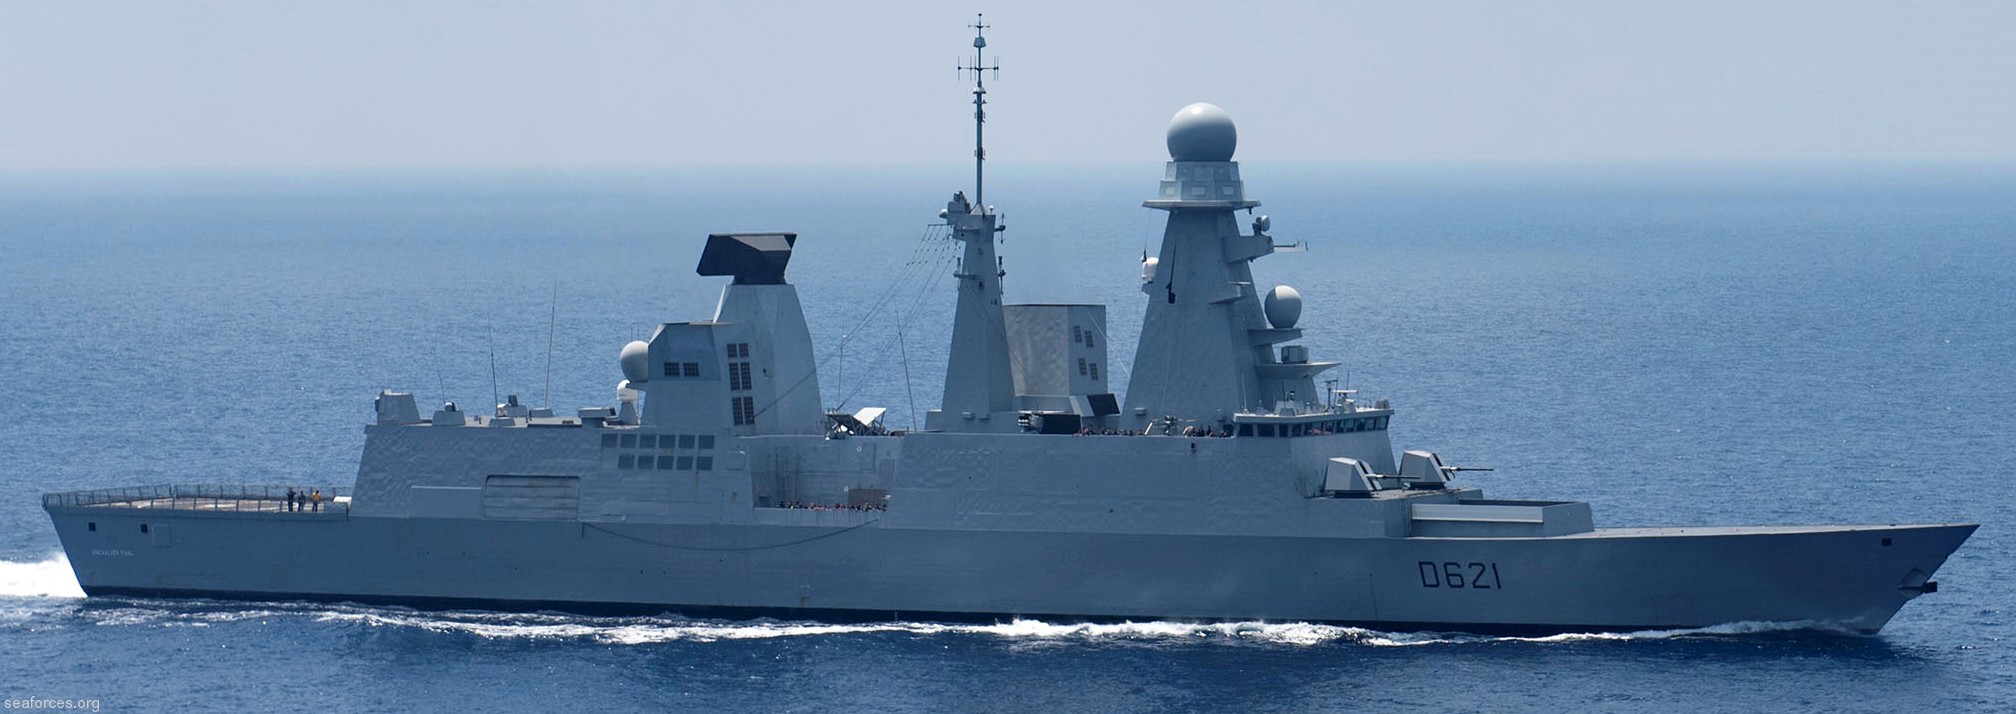 d-621 fs chevalier paul forbin horizon class guided missile frigate anti-air-warfare aaw ffgh french navy marine nationale 02